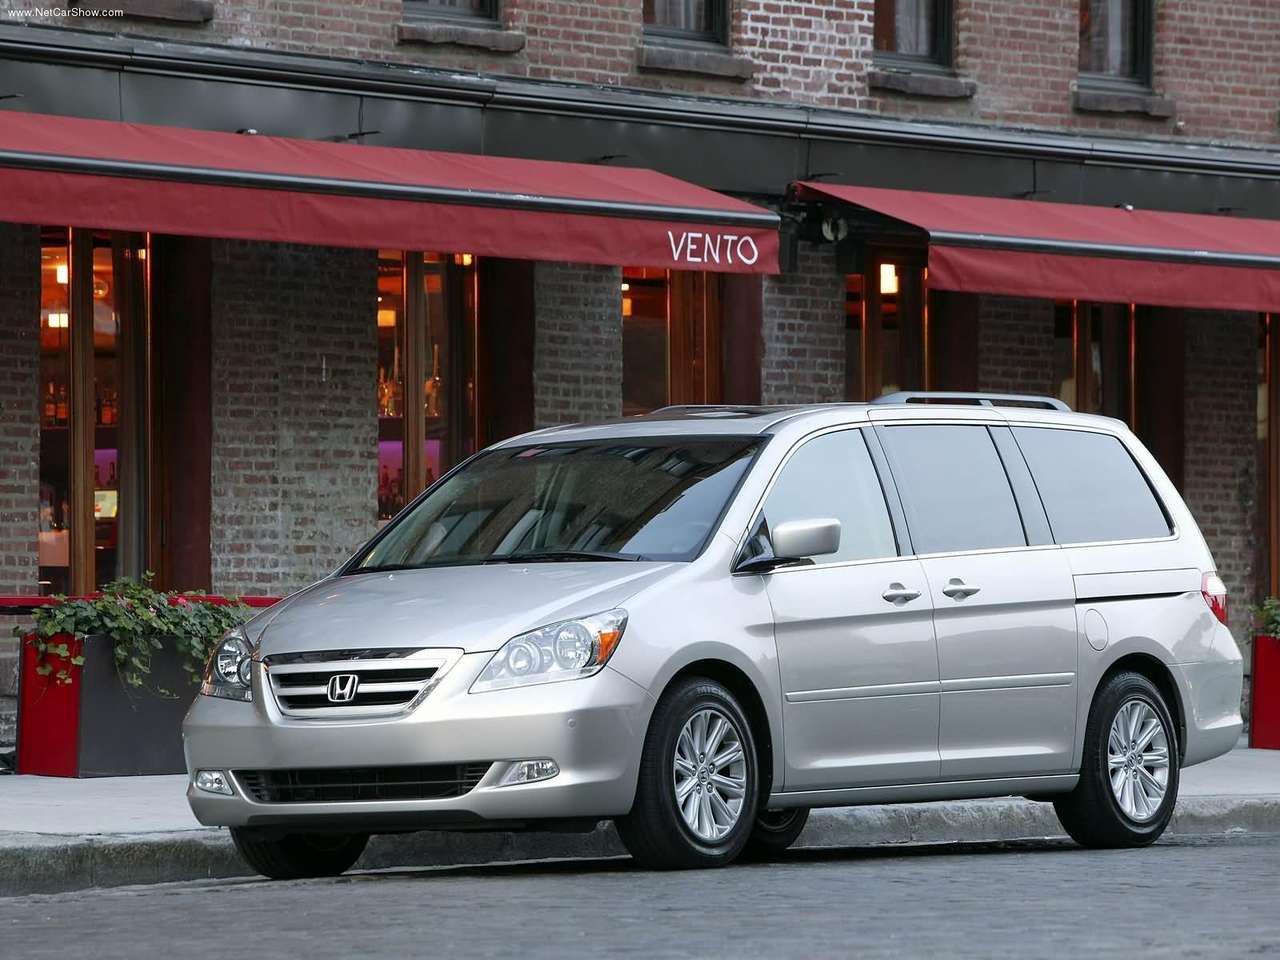 2005 Honda odyssey touring standard features #7